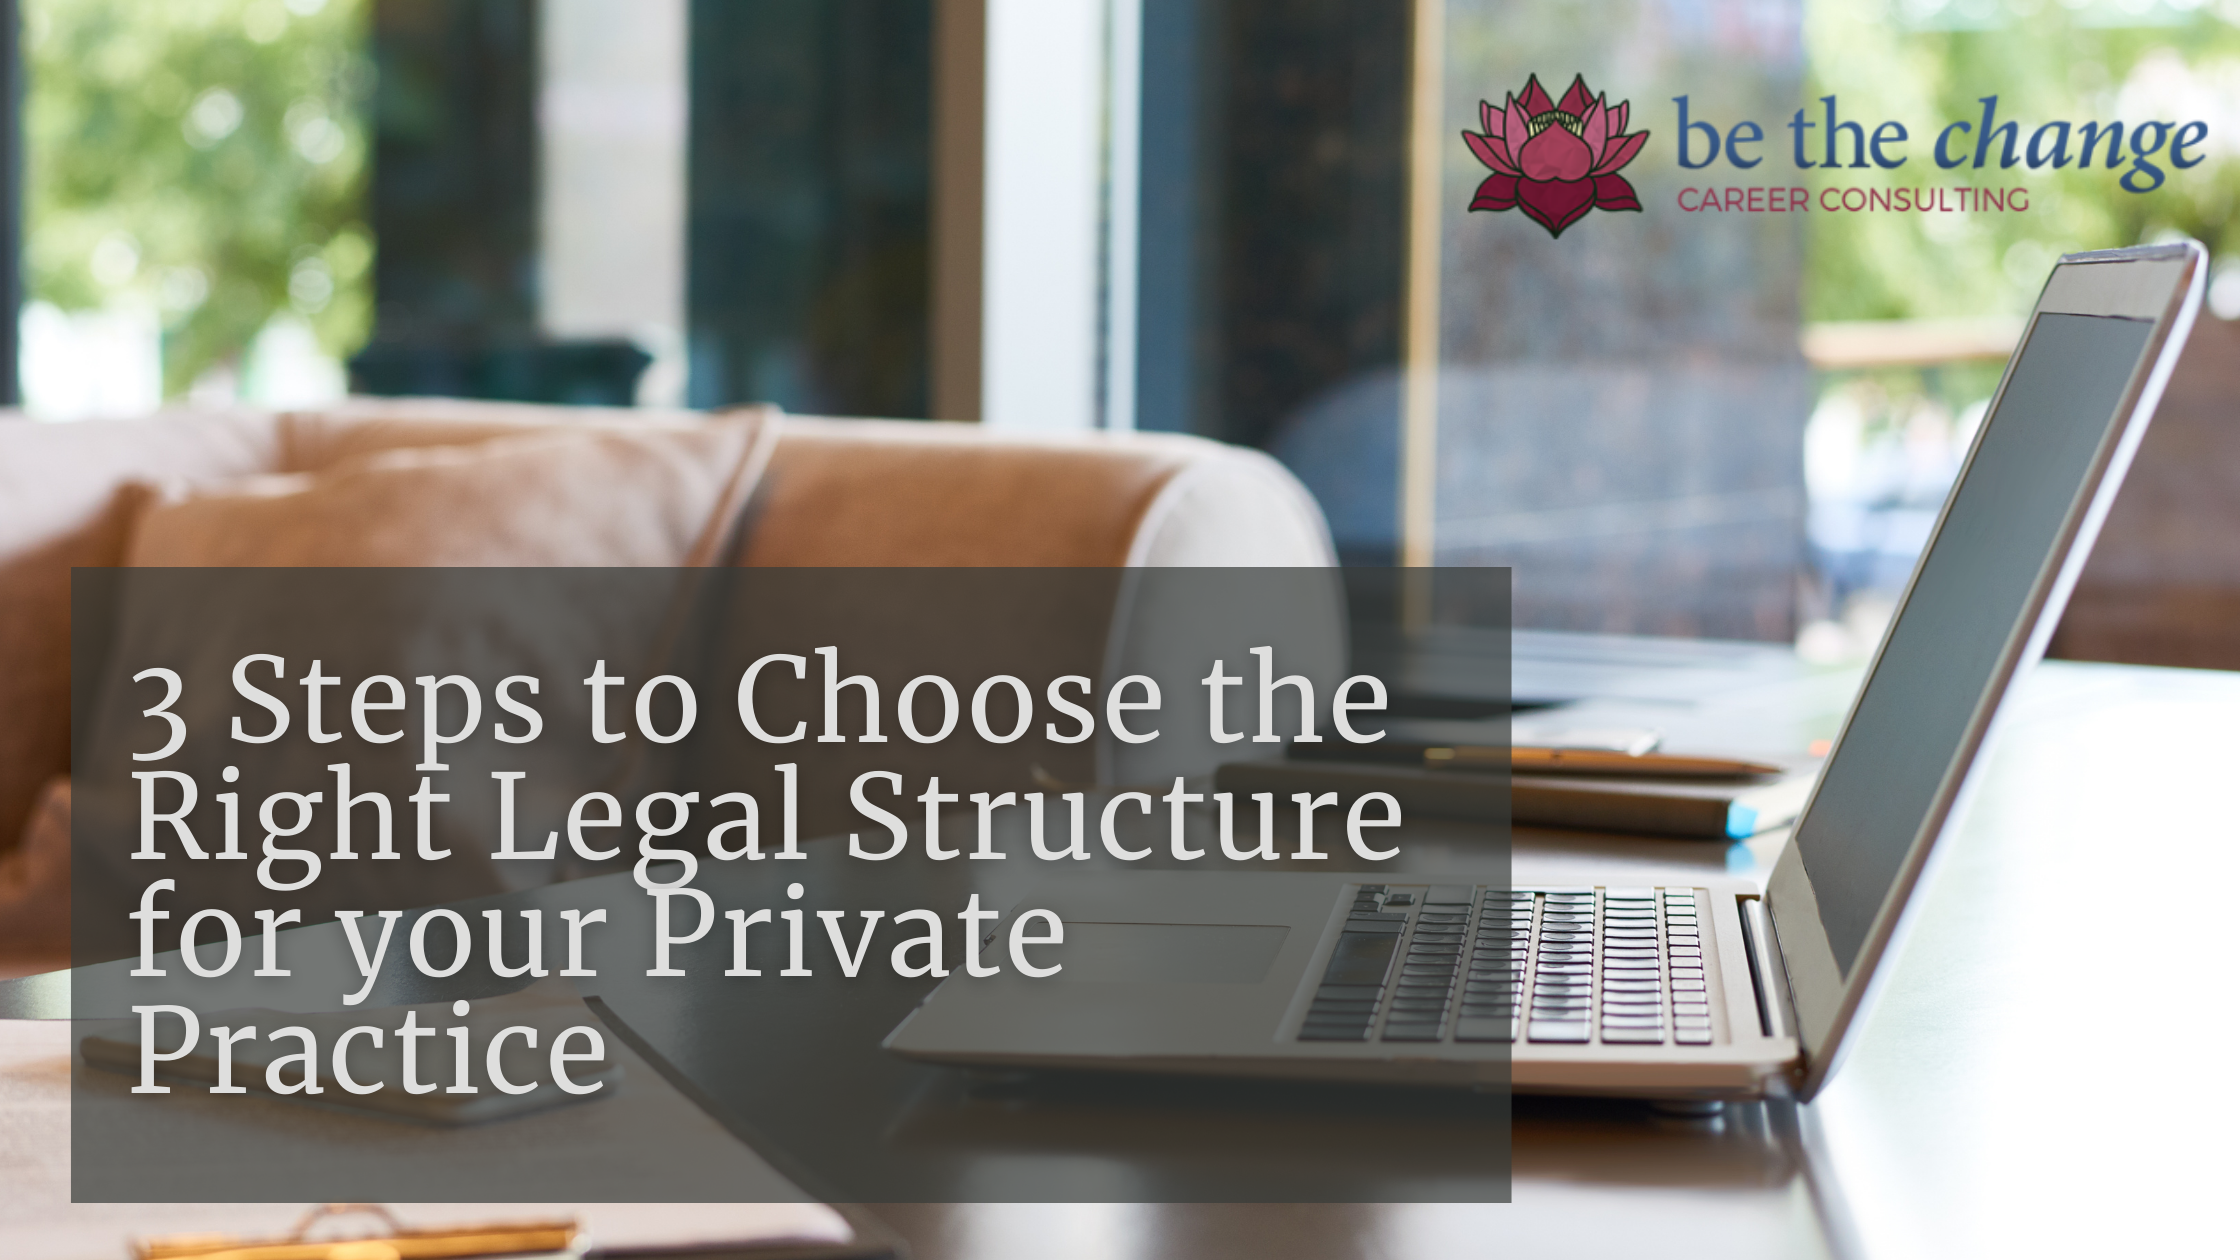 3 steps to choose the right legal structure for your business